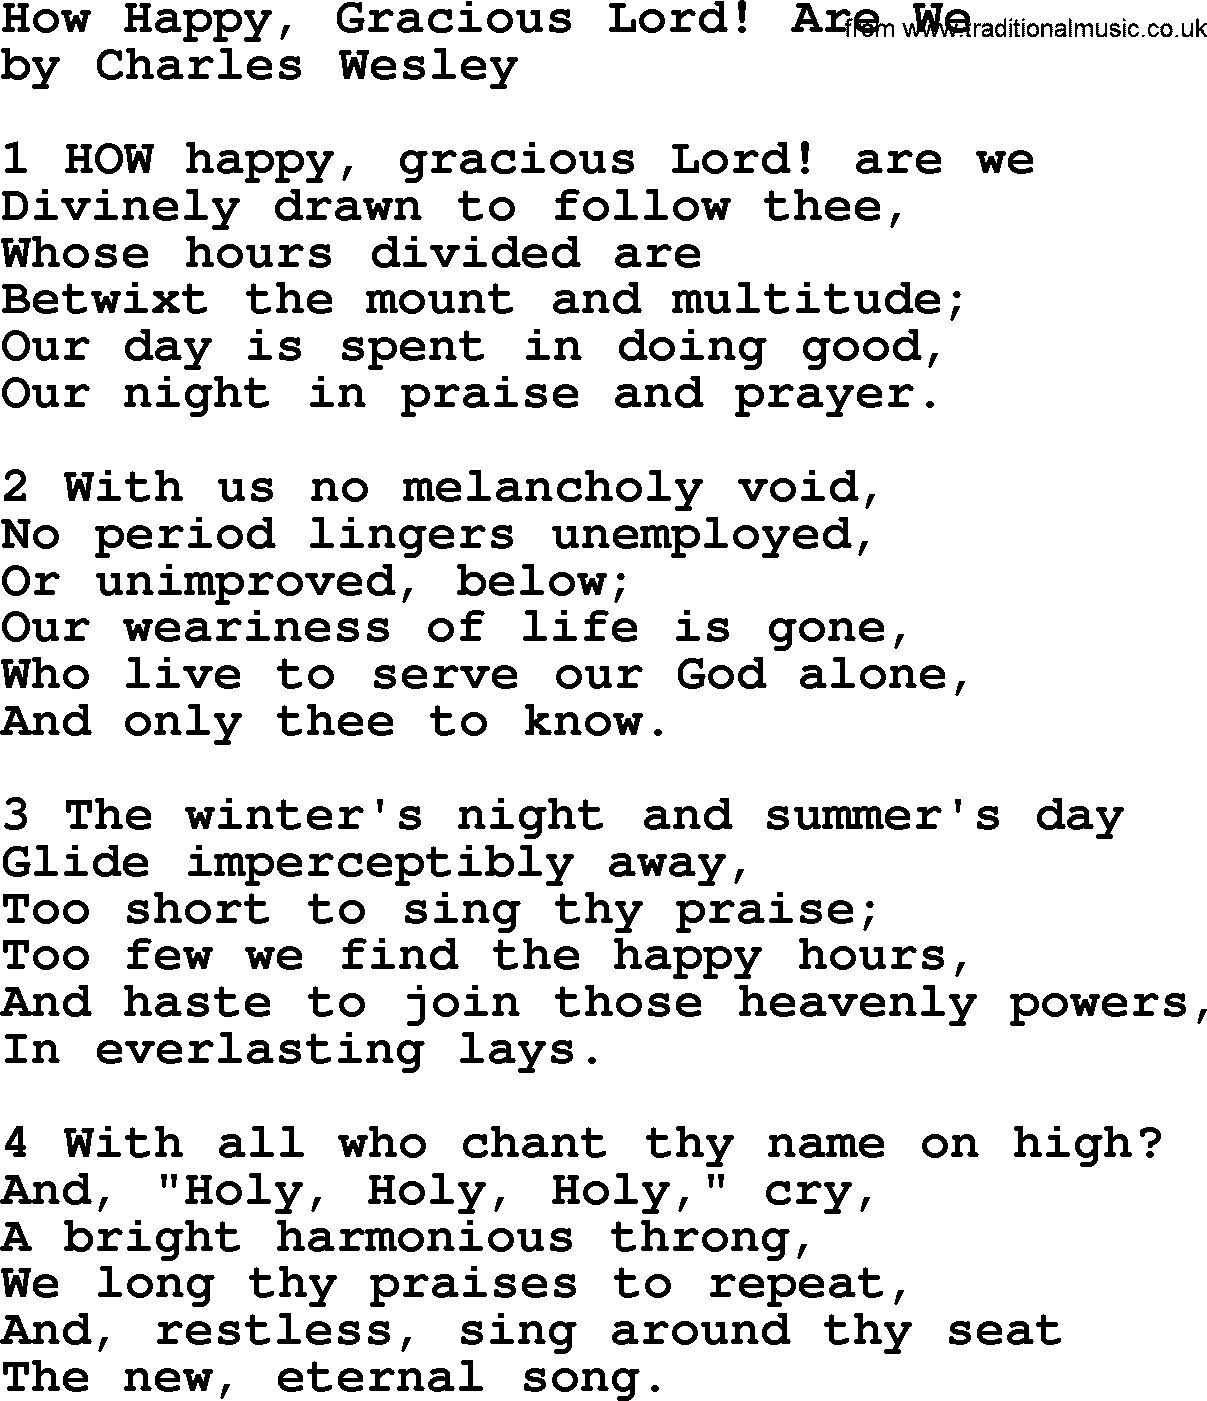 Charles Wesley hymn: How Happy, Gracious Lord! Are We, lyrics